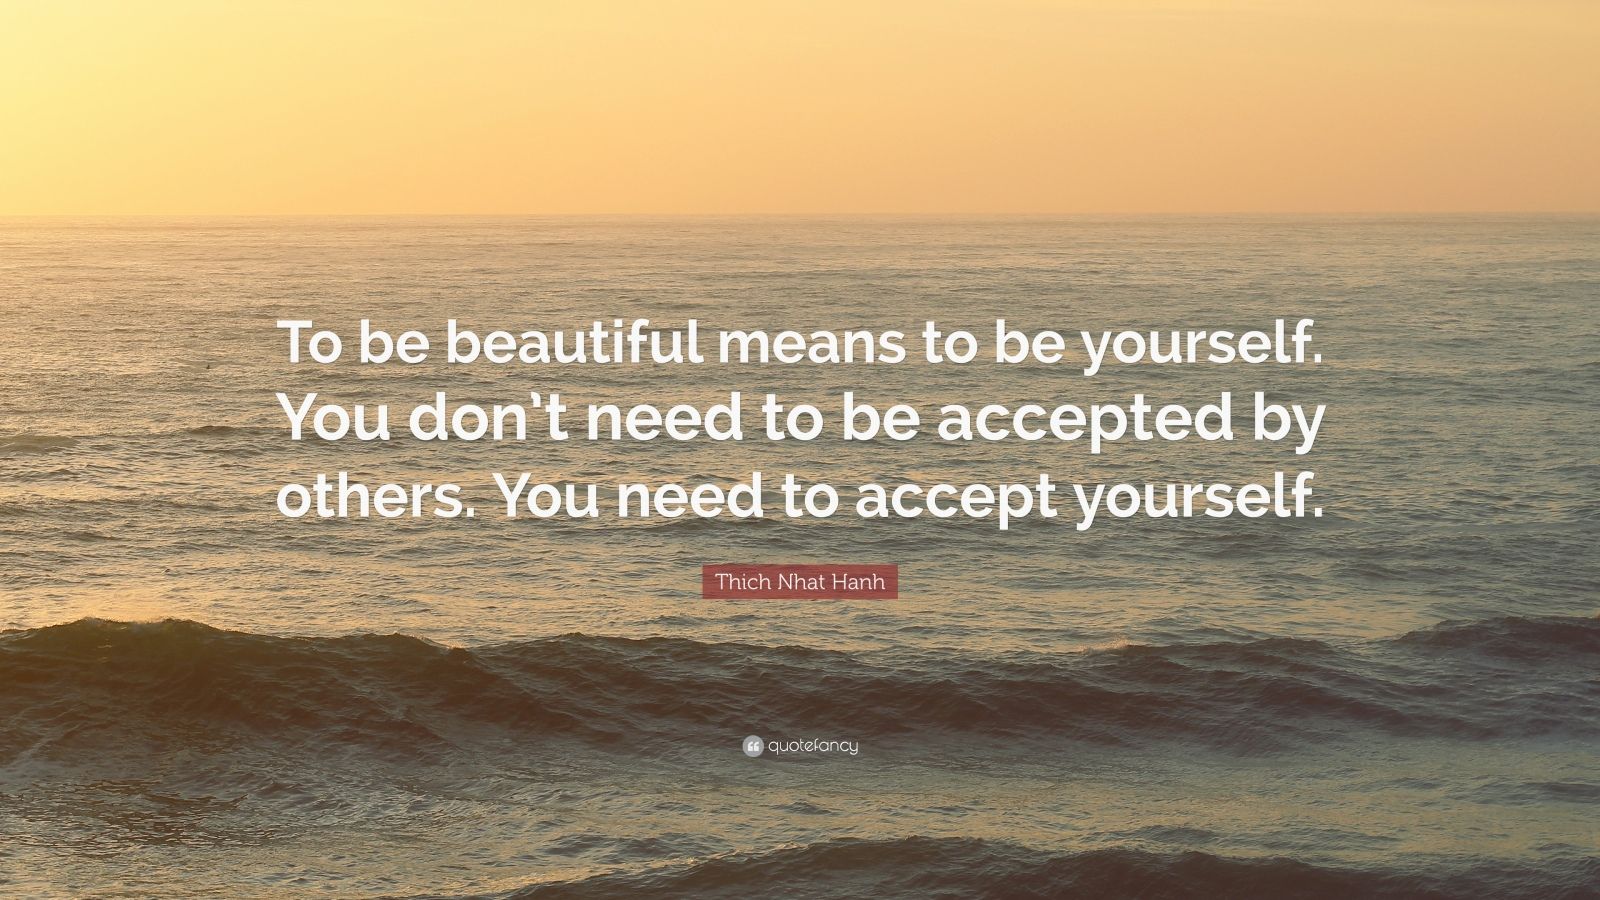 Thich Nhat Hanh Quote: “To be beautiful means to be yourself. You don’t